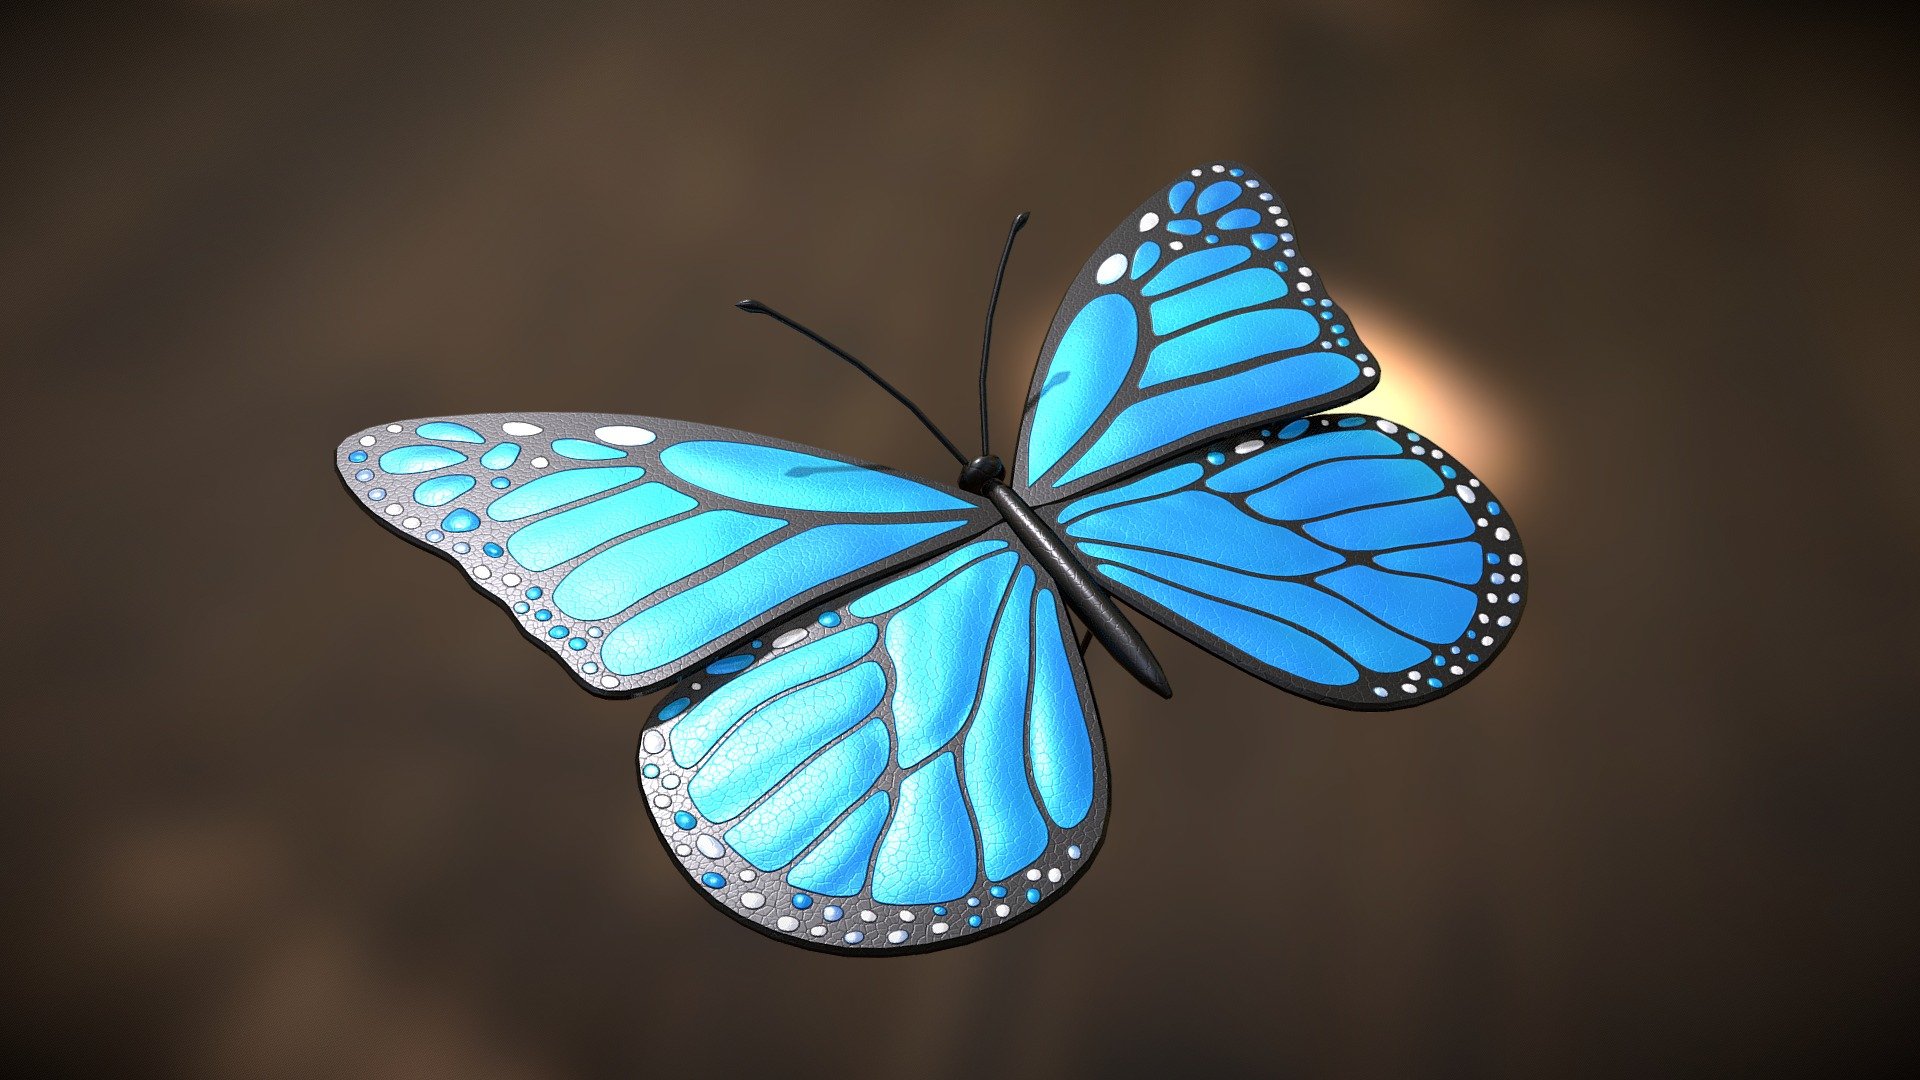 A simple butterfly I made for my Hidden Strawberries scene.

I'm not sure if blue monarch butterflies exist in reality, but they do exist in the Guild Wars 2 MMO near a particular strawberry patch.

You're welcome to use this little guy in your own scenes - and if you do, I'd love to hear about it! 🦋

Modeled in Blender 2.82, textured in Substance Painter 2020.1.0 - Blue Monarch Butterfly - Download Free 3D model by Kianga 3d model